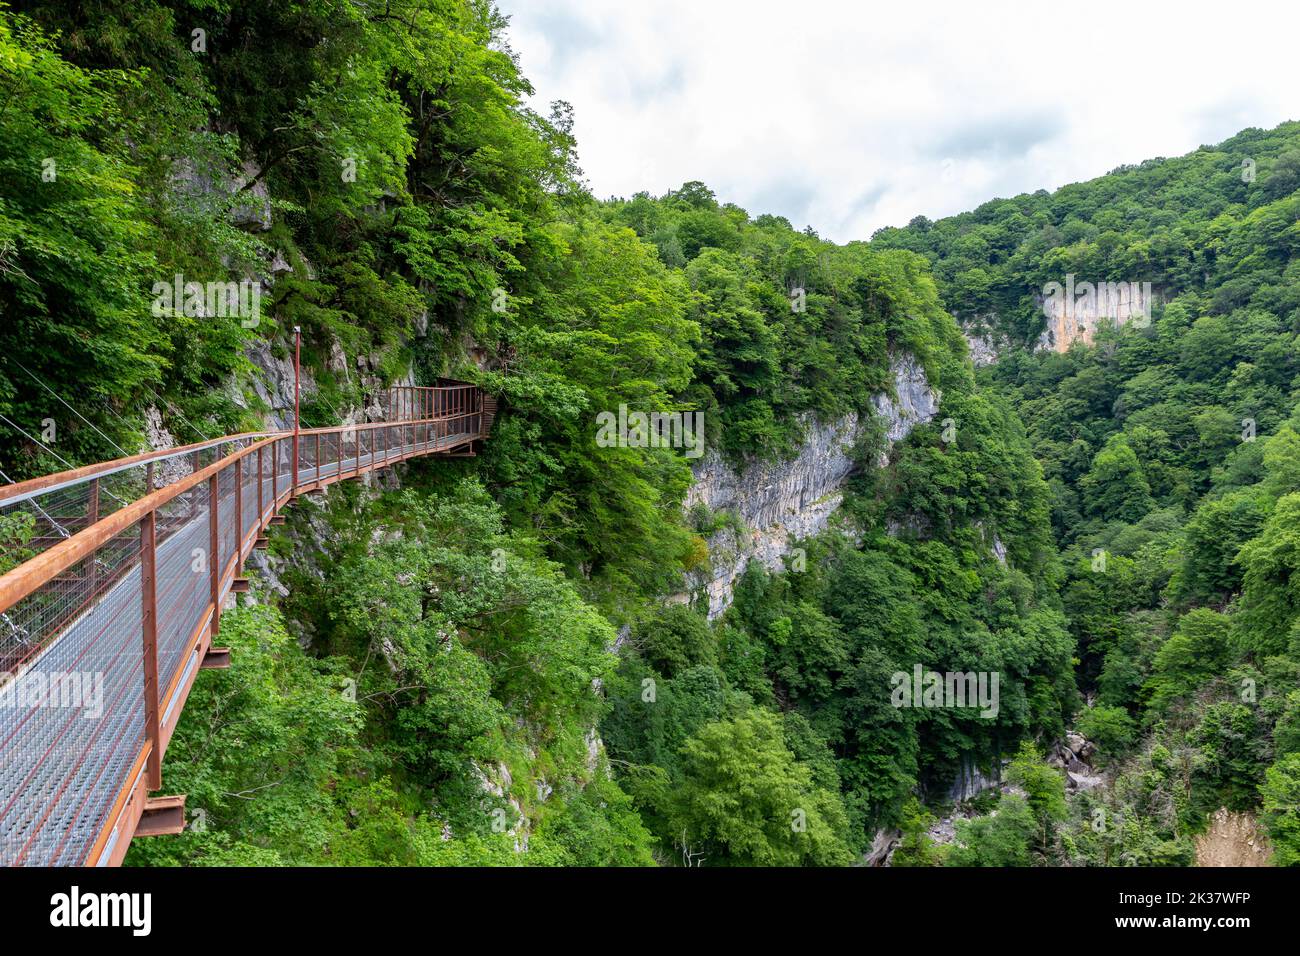 Okatse Canyon in Georgia with hanging metal pedestrian pathway trail above deep precipice, lush vegetation and forests, no people. Stock Photo